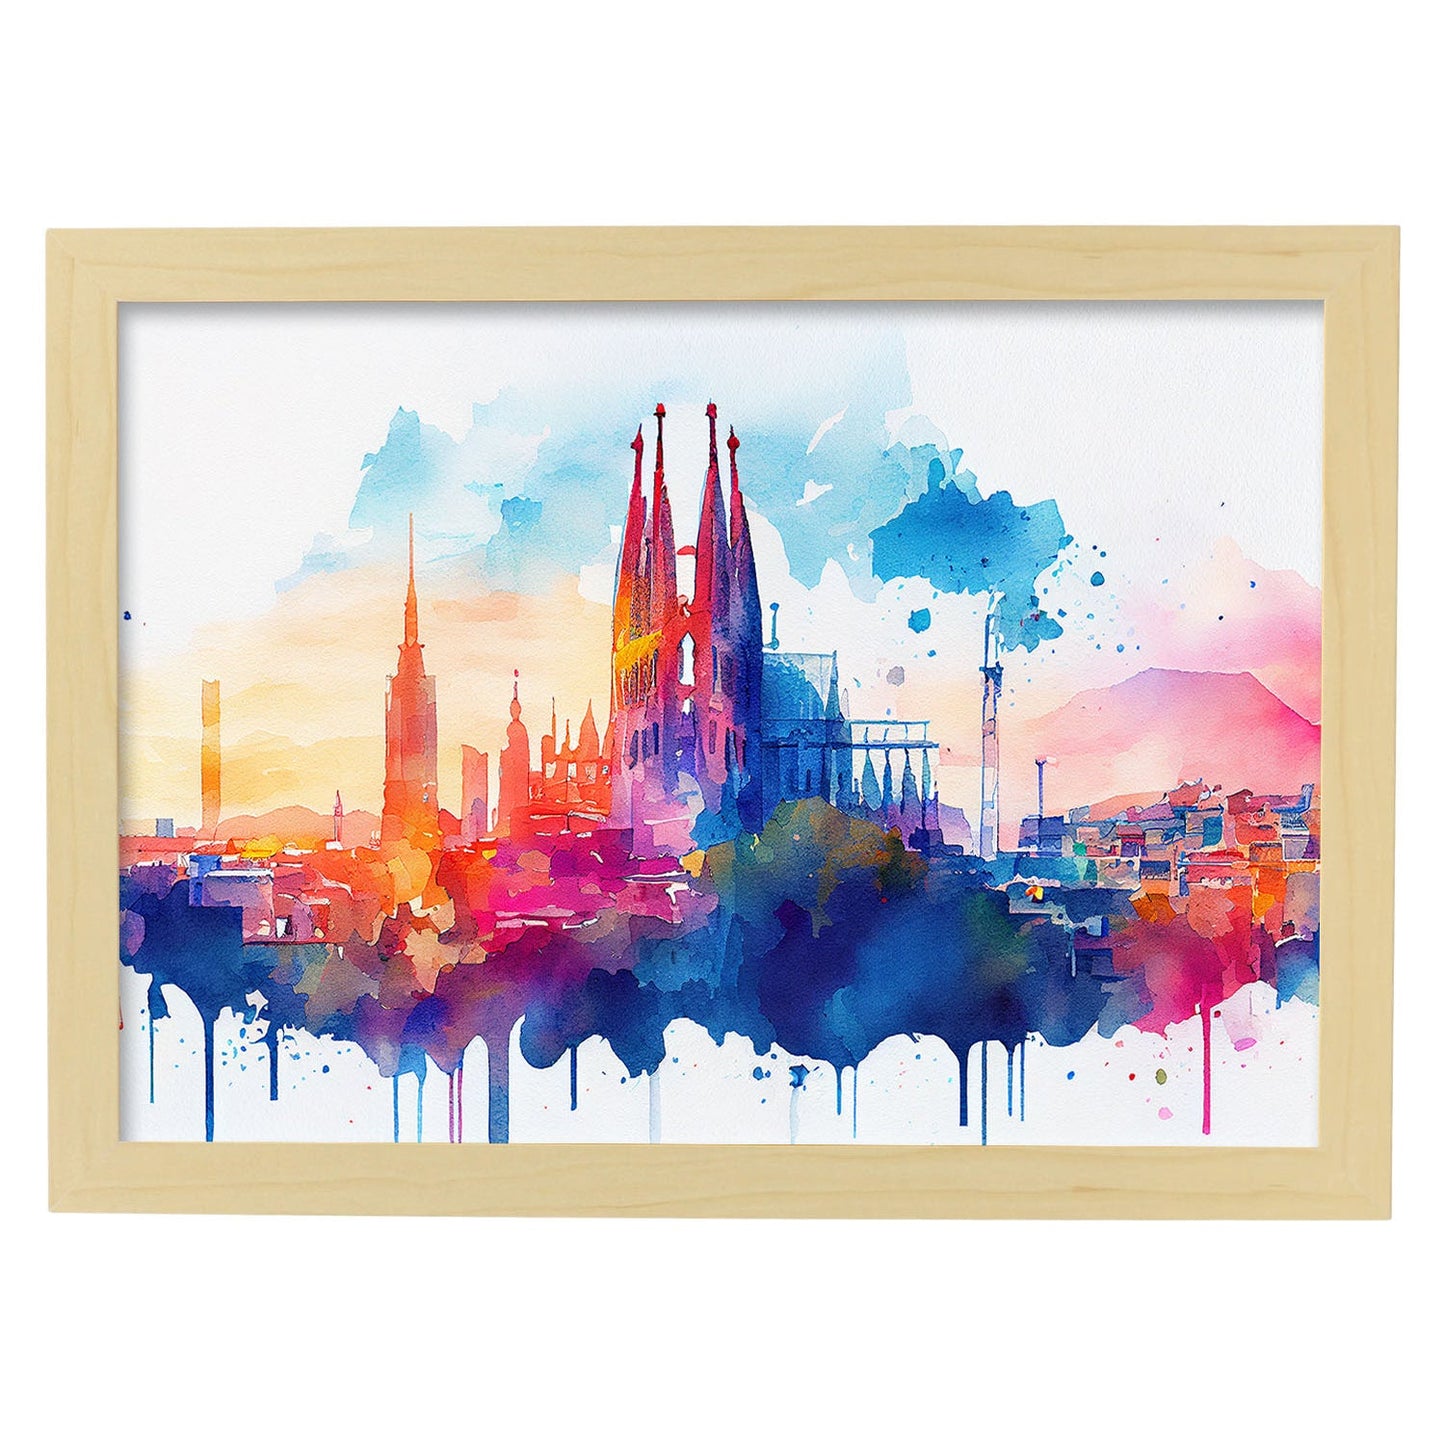 Nacnic watercolor of a skyline of the city of Barcelona_1. Aesthetic Wall Art Prints for Bedroom or Living Room Design.-Artwork-Nacnic-A4-Marco Madera Clara-Nacnic Estudio SL